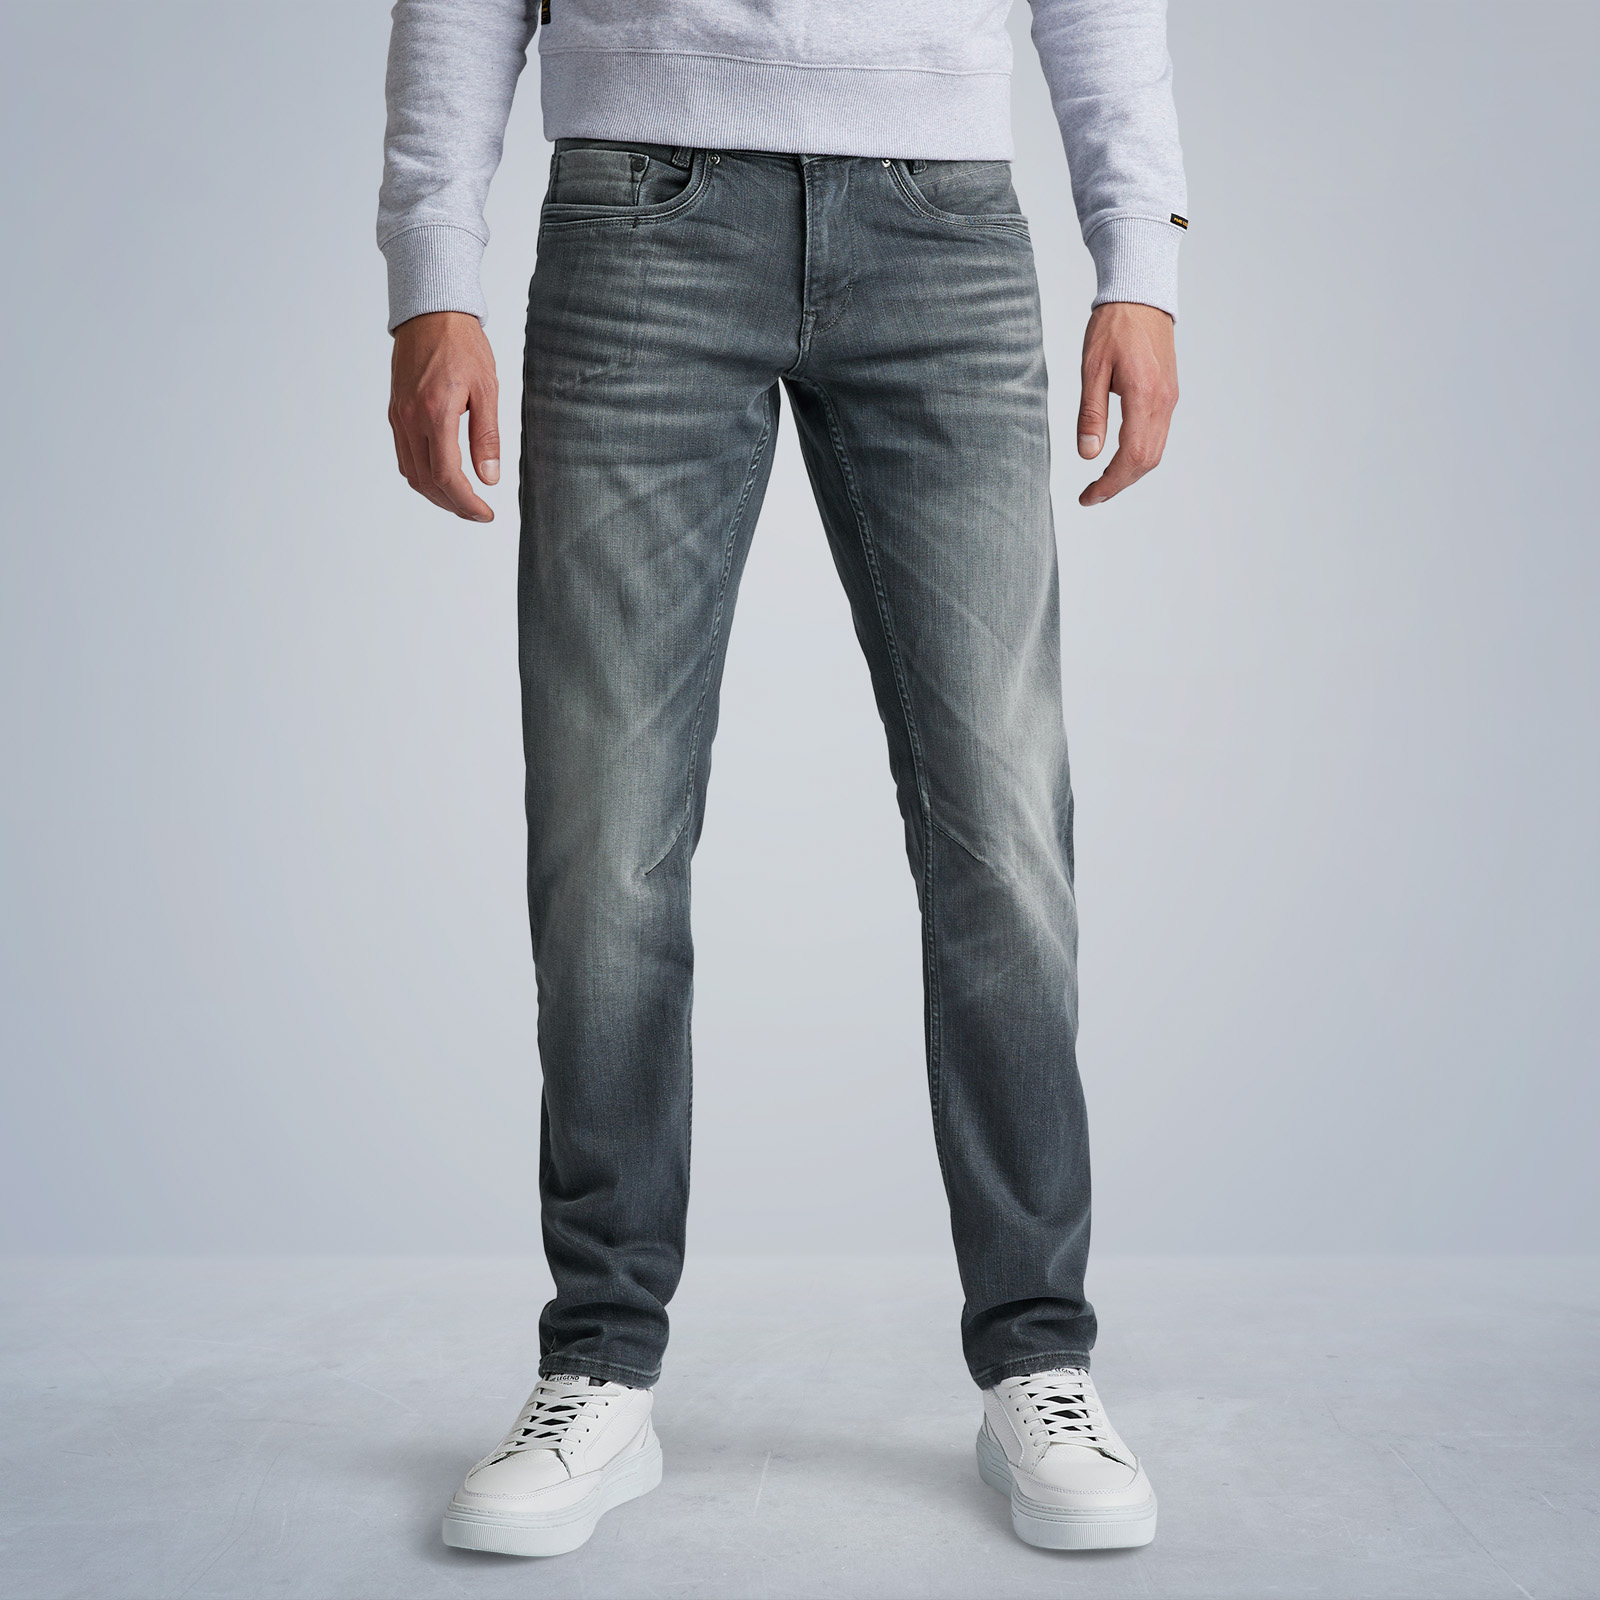 JEANS Skymaster Grey Wash | Free shipping and returns